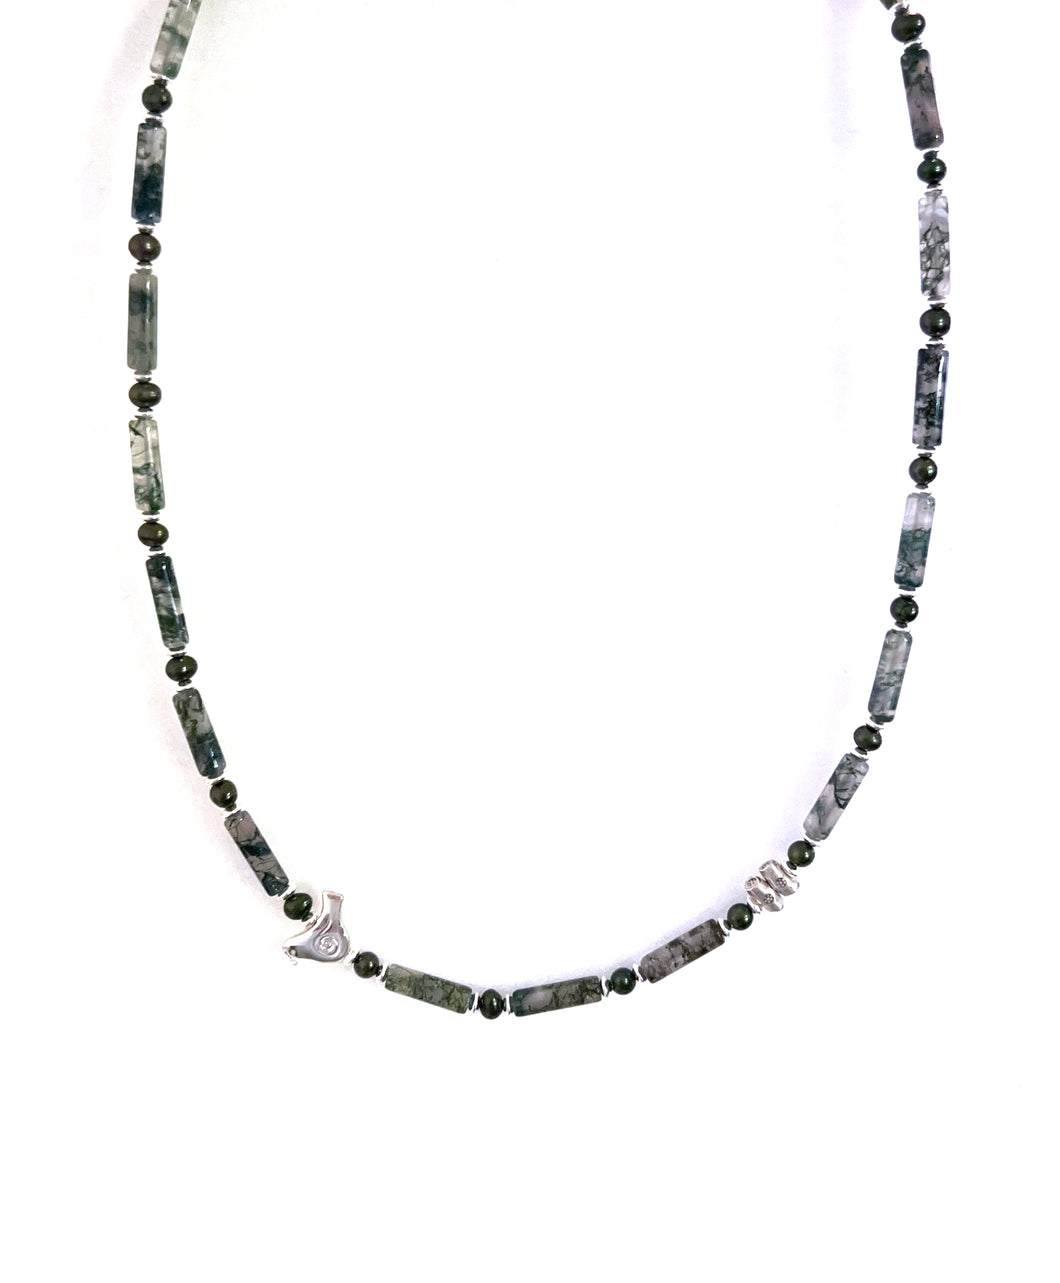 Australian Handmade Green Necklace with Moss Agate Pearls and Sterling Silver